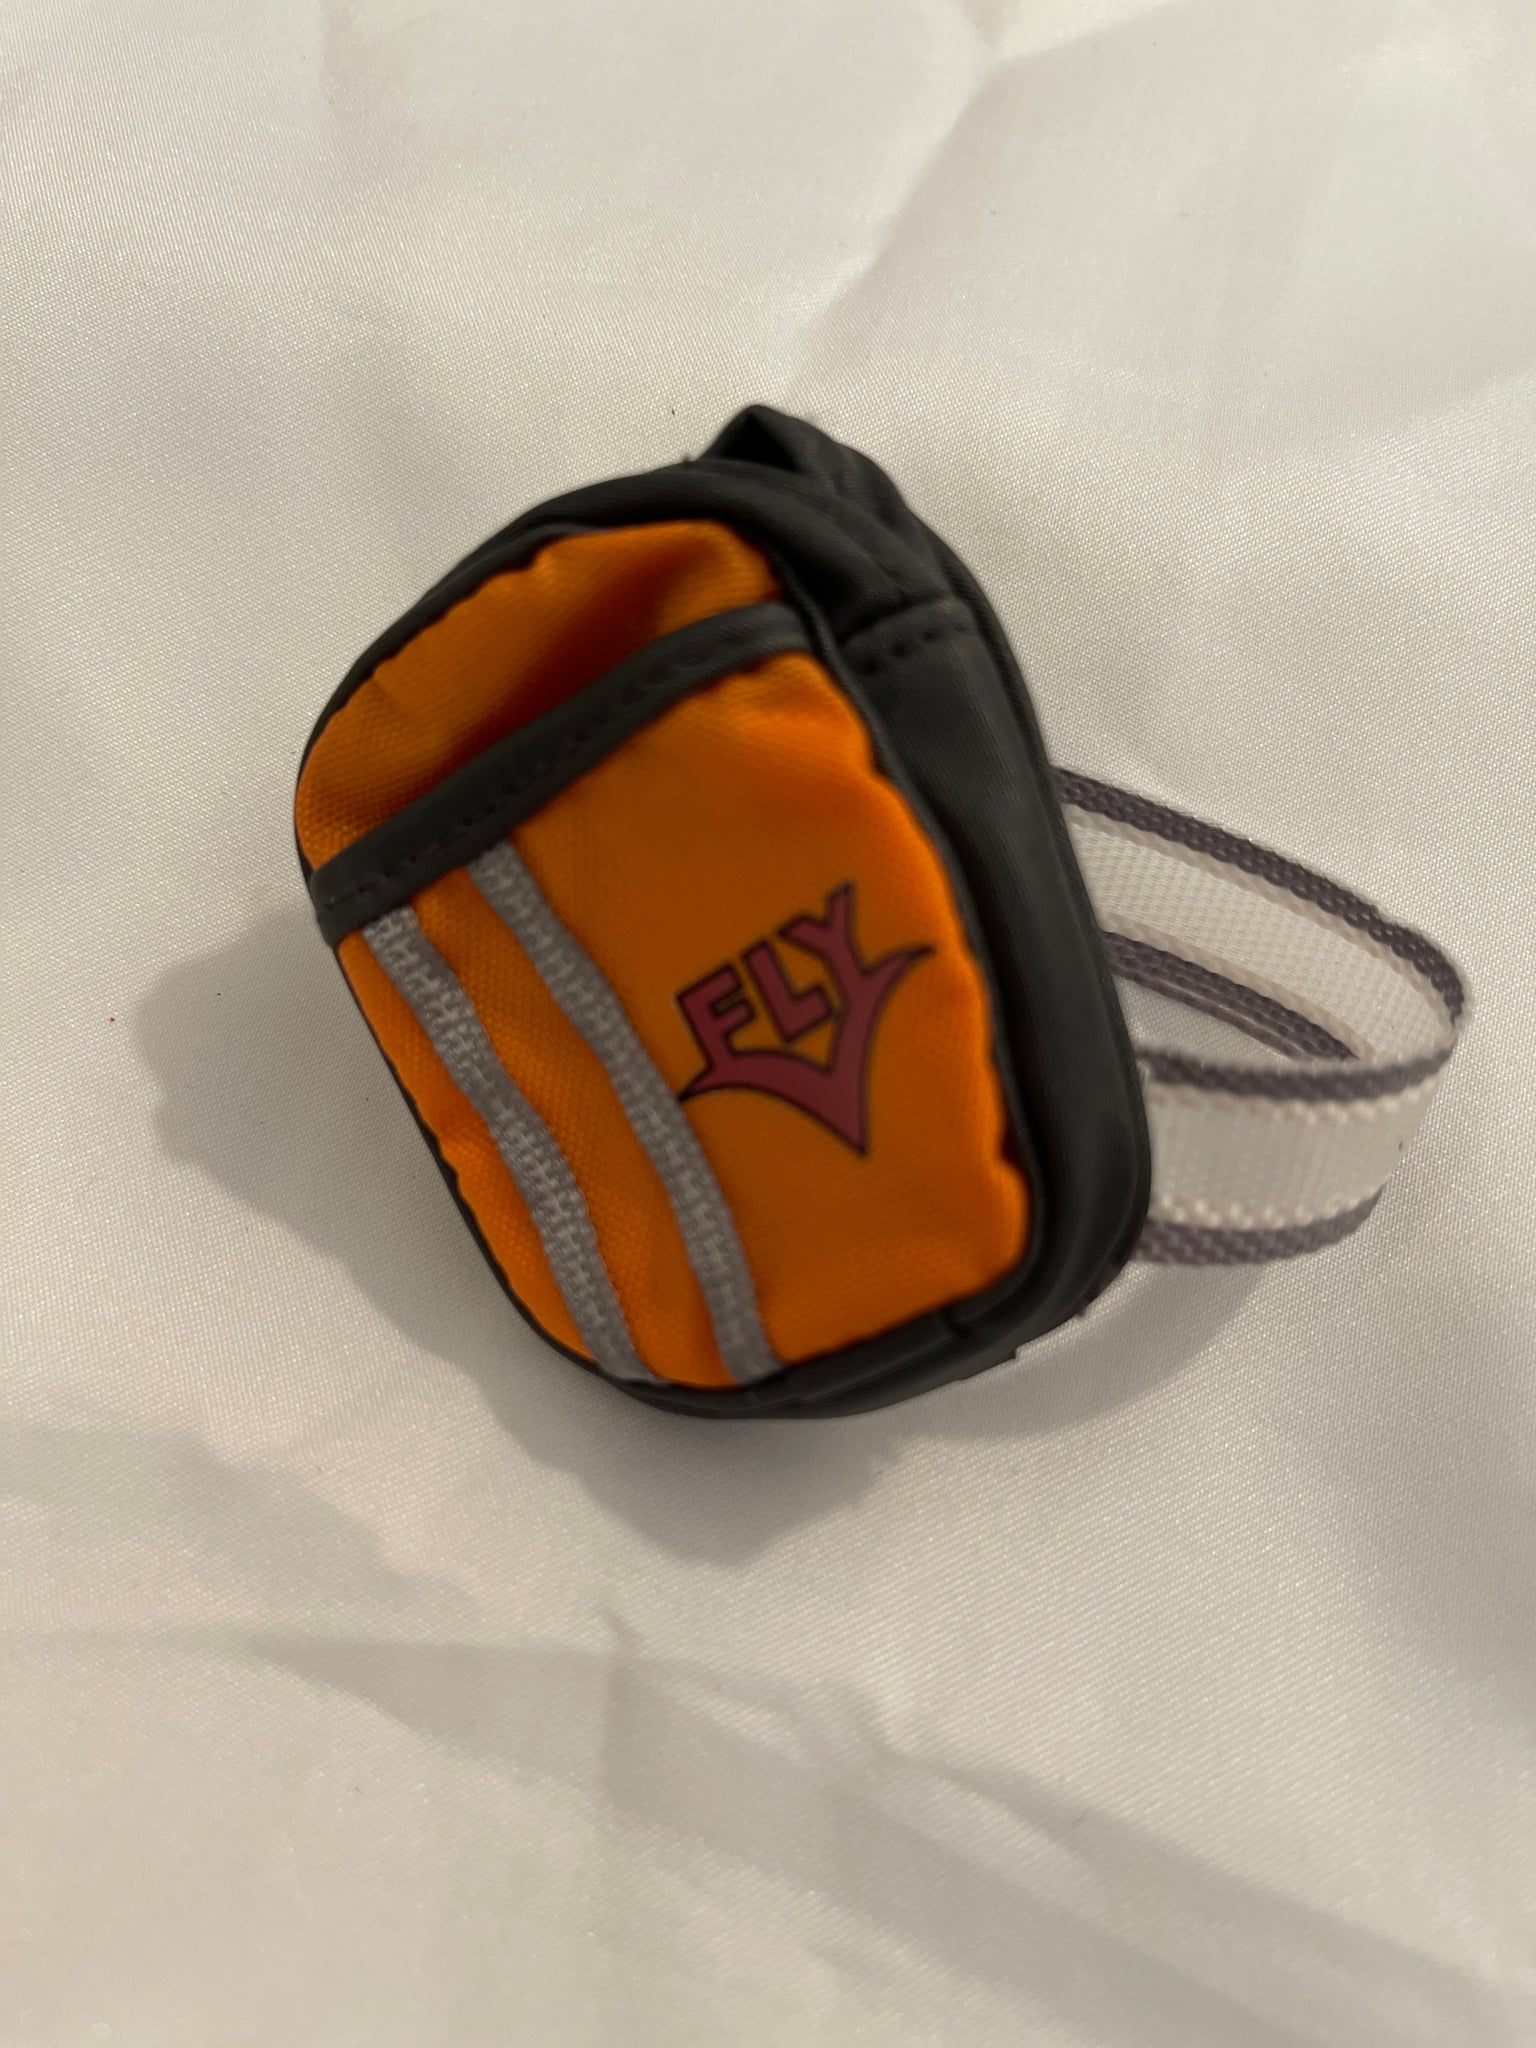 Bratz Doll Purse #1 Orange Gray FLY Backpack (Pre-owned